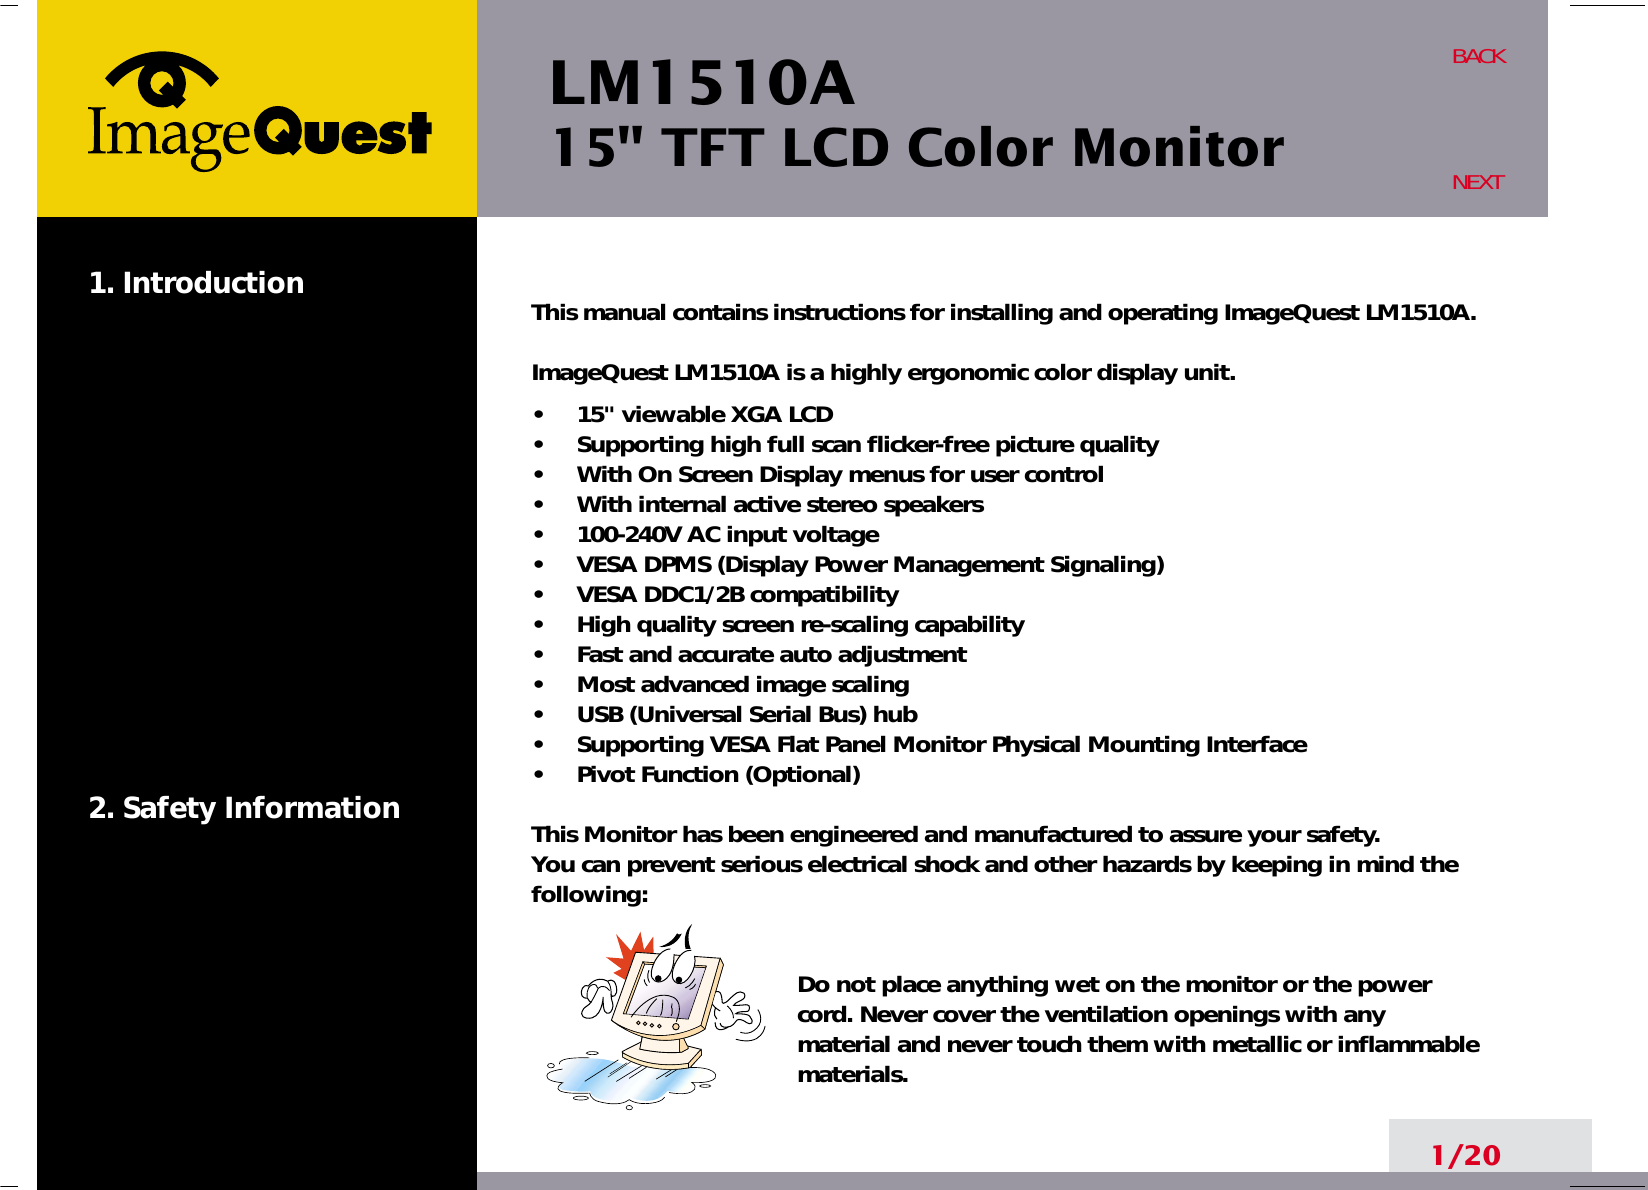 LM1510A15&quot; TFT LCD Color Monitor1. Introduction2. Safety Information1/20BACKNEXTThis manual contains instructions for installing and operating ImageQuest LM1510A.ImageQuest LM1510A is a highly ergonomic color display unit.•     15&quot; viewable XGA LCD•     Supporting high full scan flicker-free picture quality•     With On Screen Display menus for user control•     With internal active stereo speakers•     100-240V AC input voltage•     VESA DPMS (Display Power Management Signaling)•     VESA DDC1/2B compatibility•     High quality screen re-scaling capability•     Fast and accurate auto adjustment•     Most advanced image scaling•     USB (Universal Serial Bus) hub•     Supporting VESA Flat Panel Monitor Physical Mounting Interface•     Pivot Function (Optional)This Monitor has been engineered and manufactured to assure your safety. You can prevent serious electrical shock and other hazards by keeping in mind thefollowing:Do not place anything wet on the monitor or the powercord. Never cover the ventilation openings with anymaterial and never touch them with metallic or inflammablematerials.